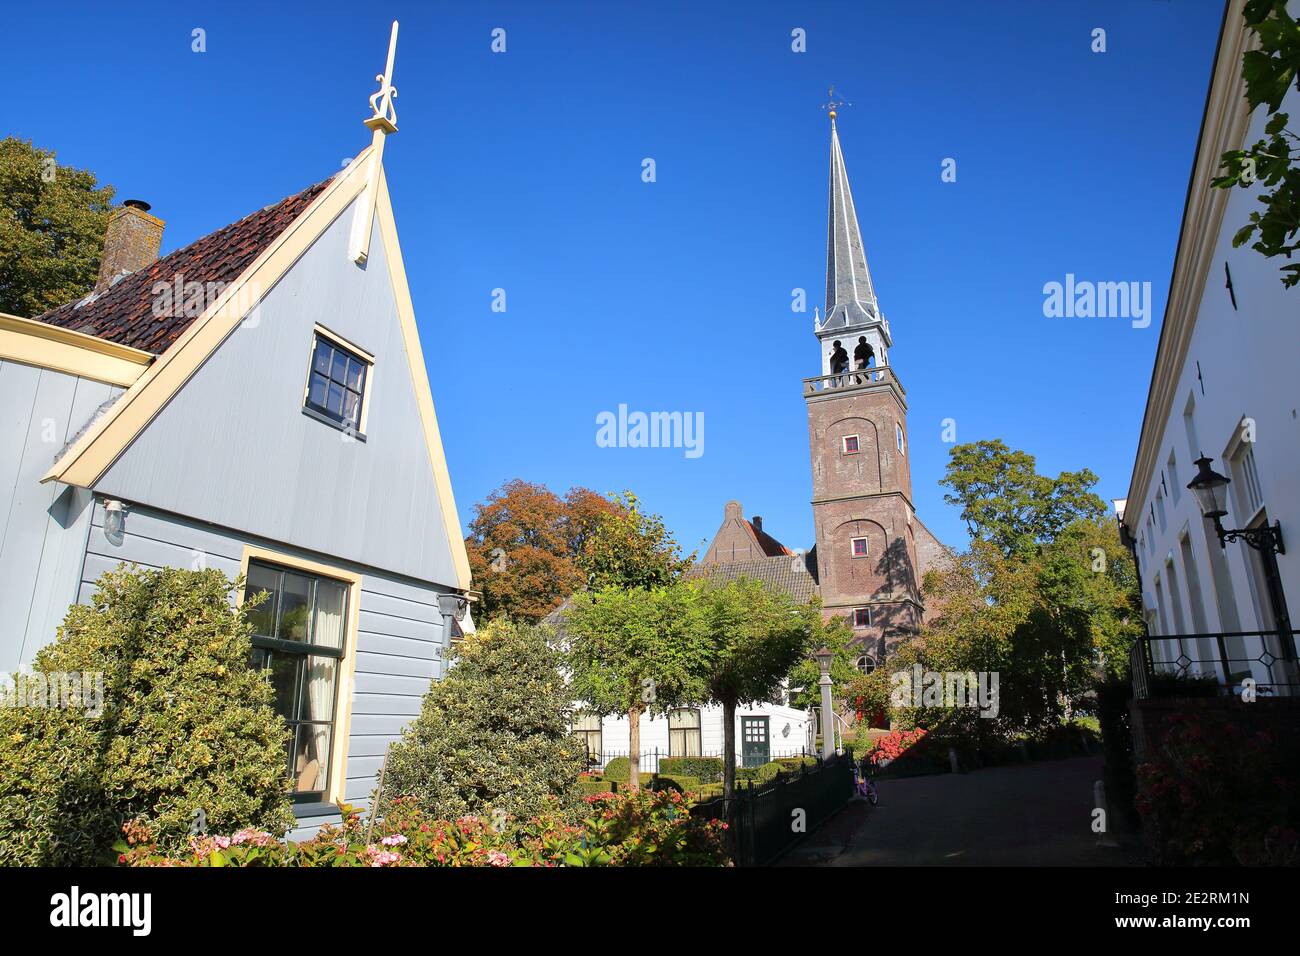 Broek in Waterland, a small town with traditional old and painted wooden houses, North Holland, Netherlands, with the bell tower of the church Stock Photo